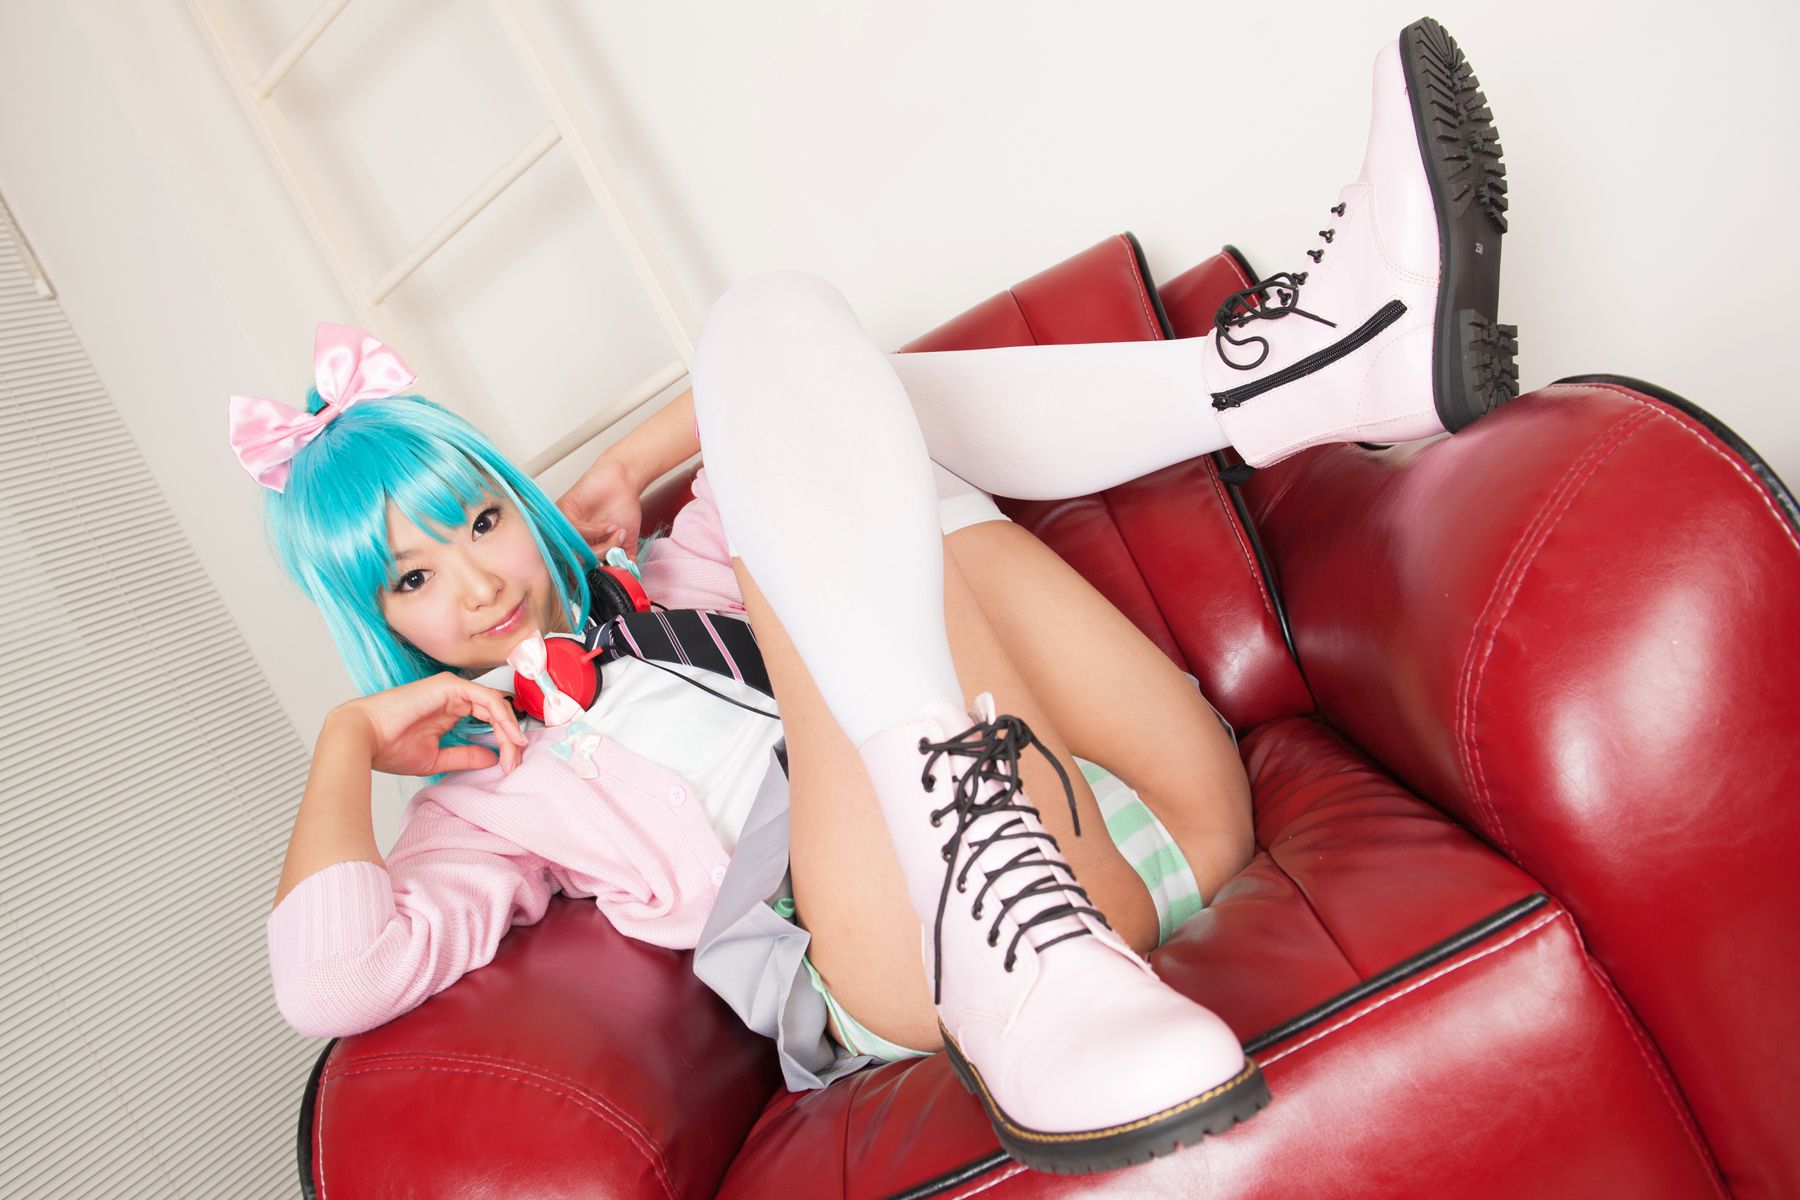 taotuhome[Cosplay] Necoco as Hatsune Miku from Vocaloid 套图第124张